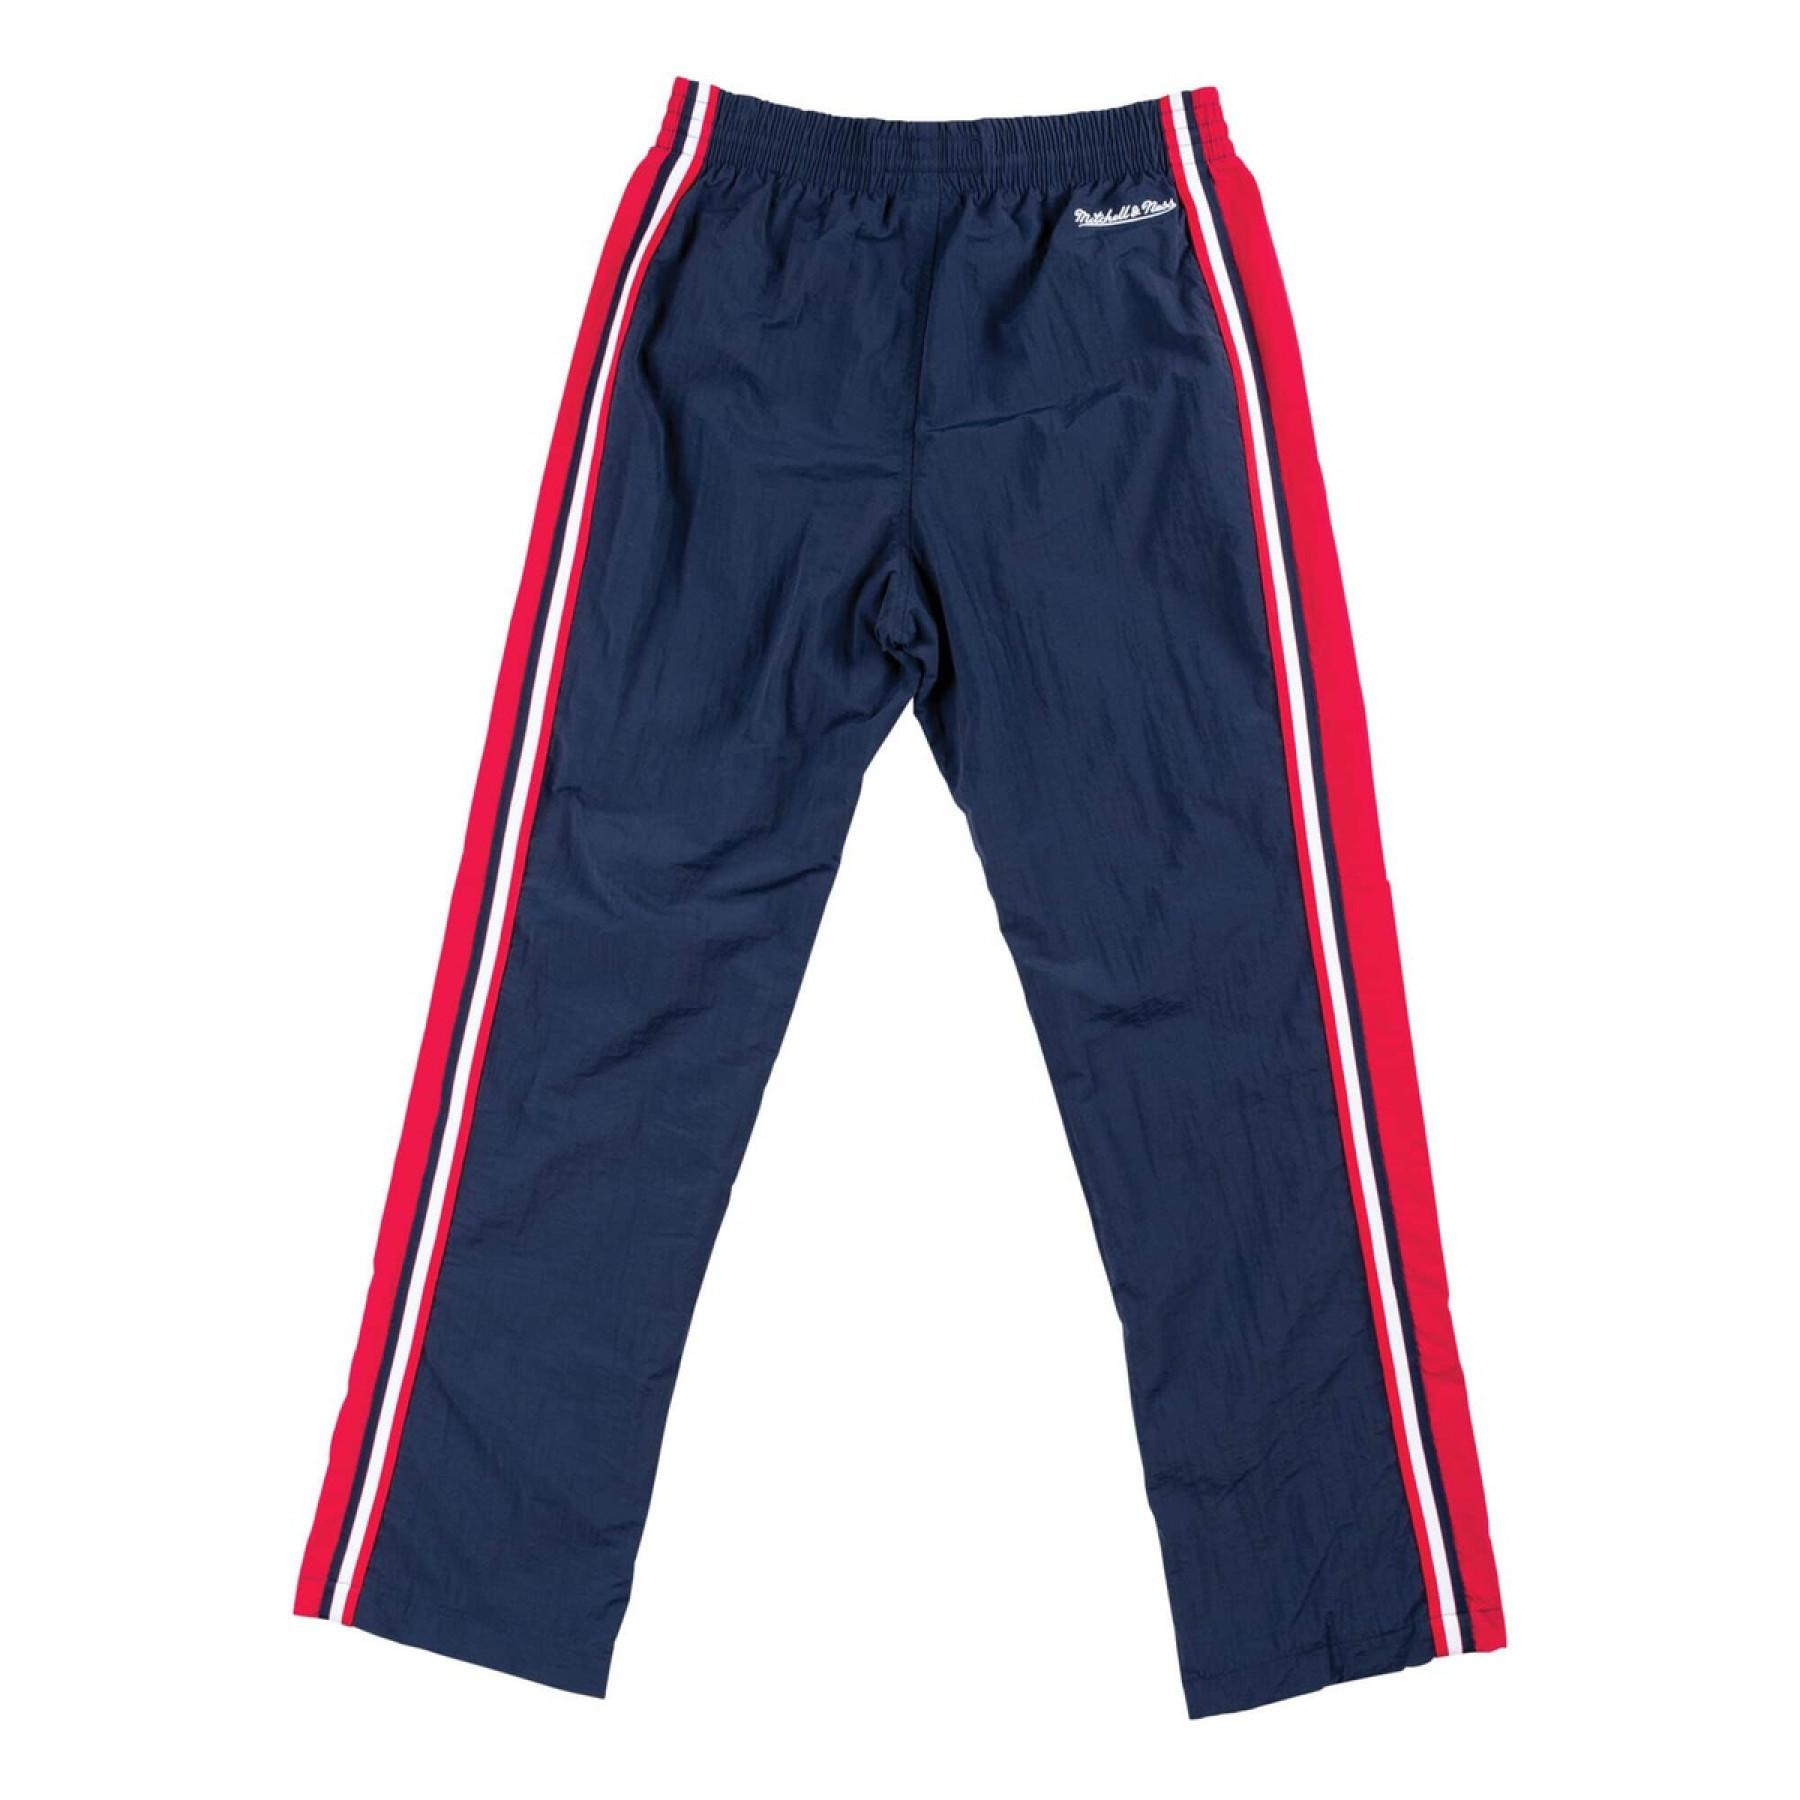 Team Pants USA authentic warm up